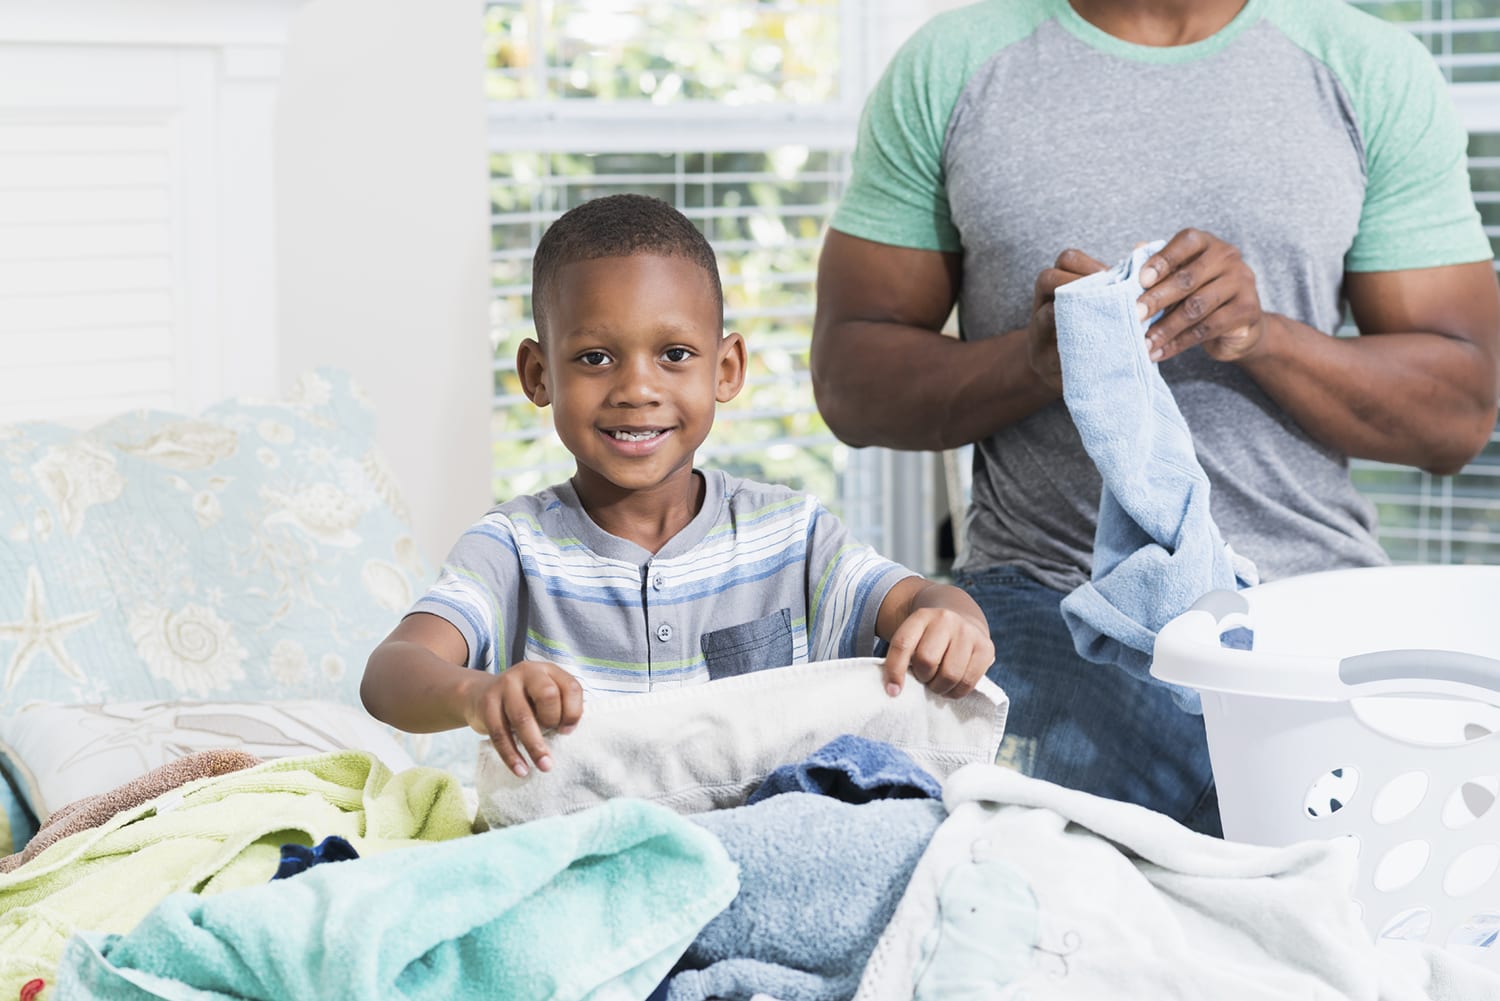 Laundry 101 for Kids